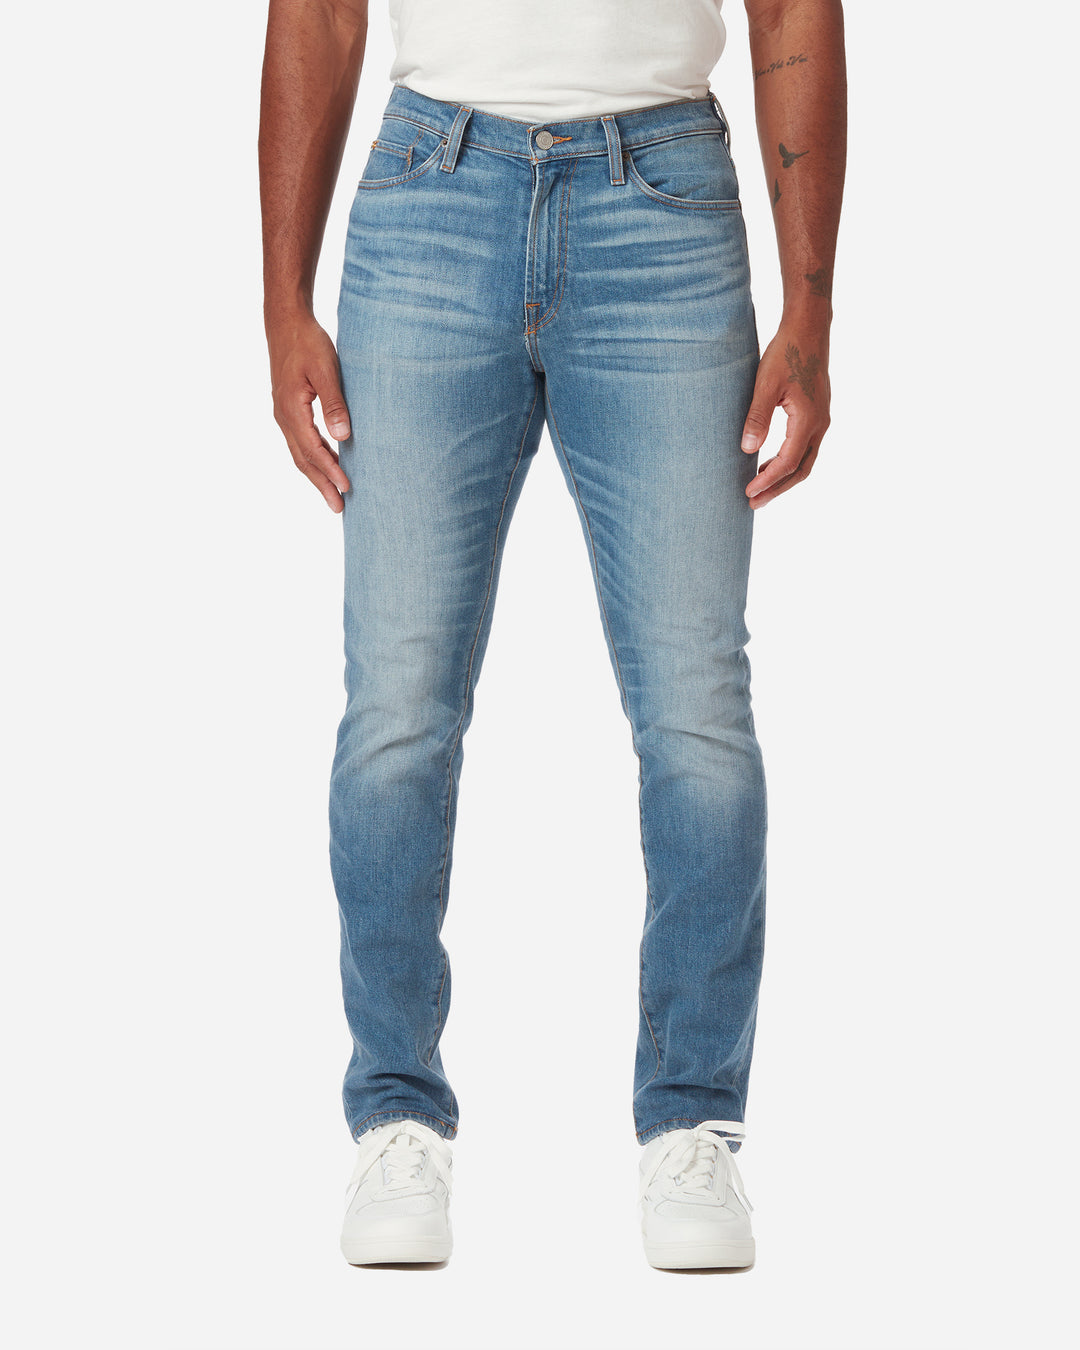 model facing directly forward wearing close up of stitching on pair of men's athletic taper medium light blue jeans with slight wear along the thigh area with a pair of white Diadora B Elite sneaker shoes and tucked white Ace Rivington super soft supima short-sleeved tee shirt